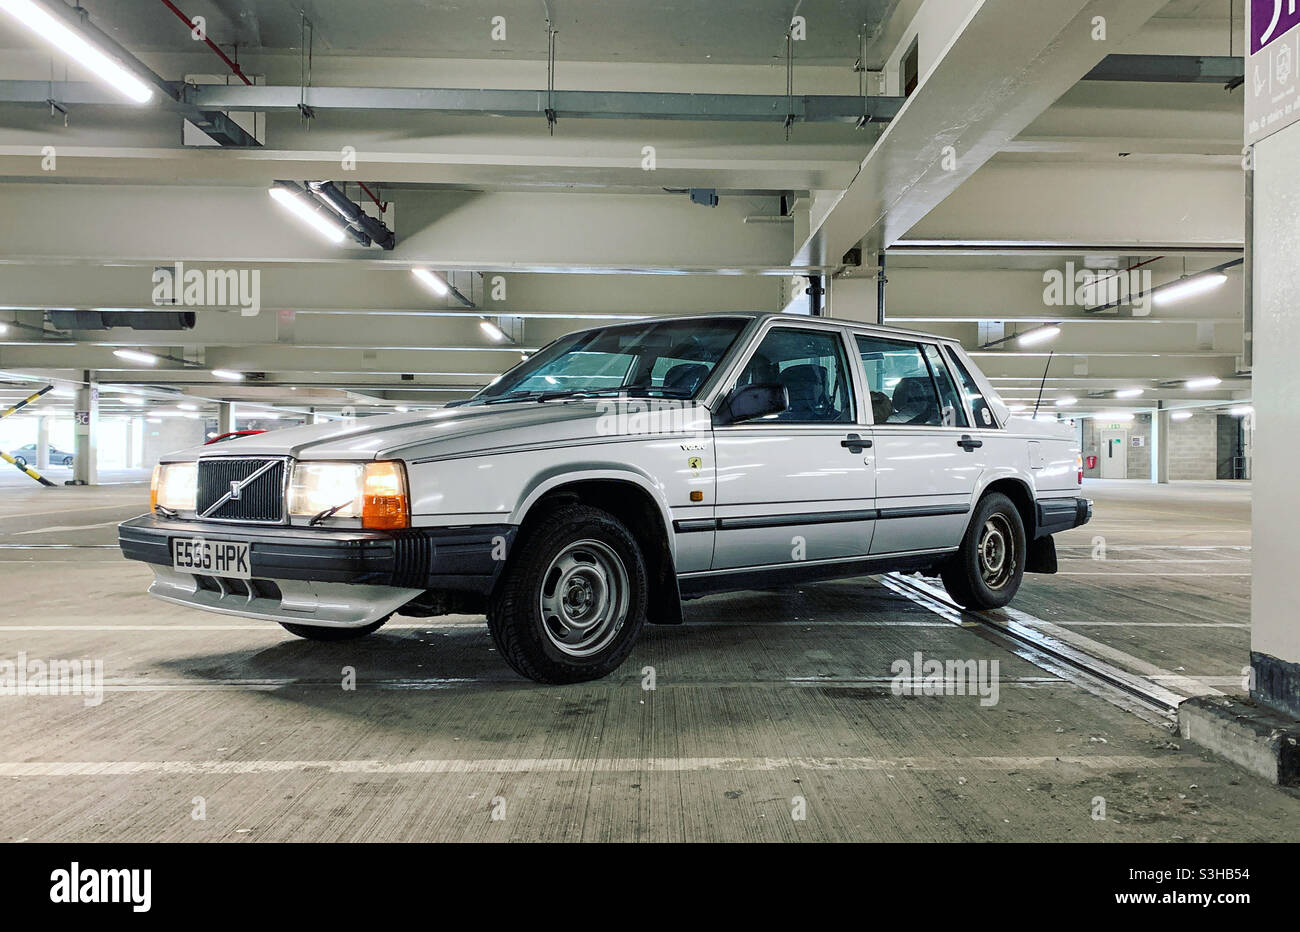 1980s Volvo 740 saloon car in a car park Stock Photo